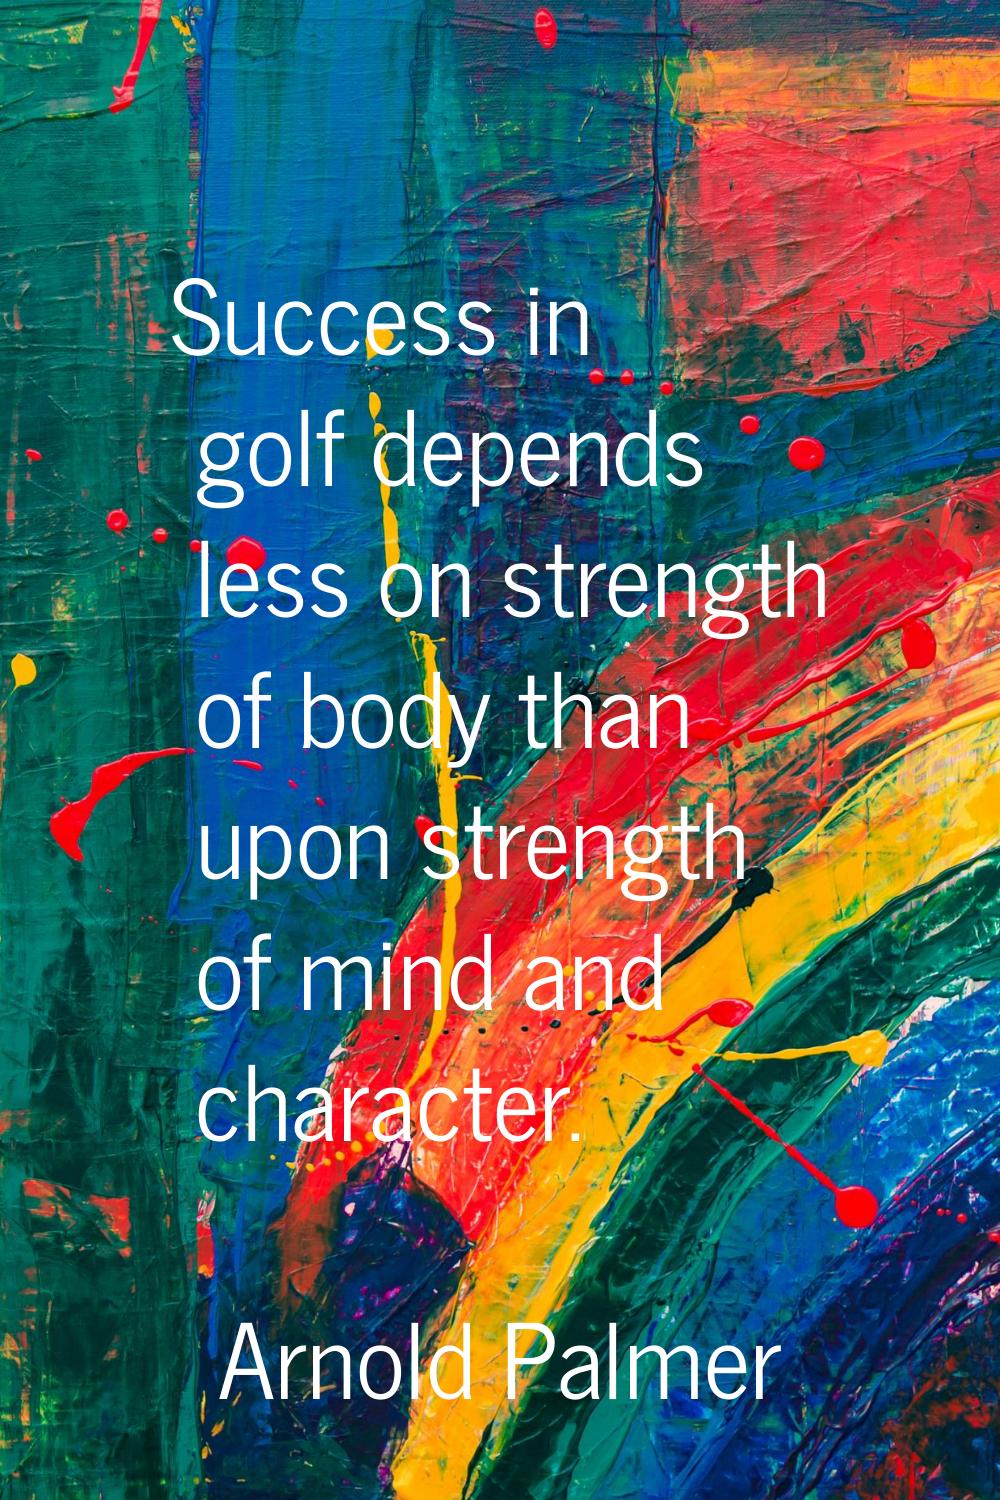 Success in golf depends less on strength of body than upon strength of mind and character.